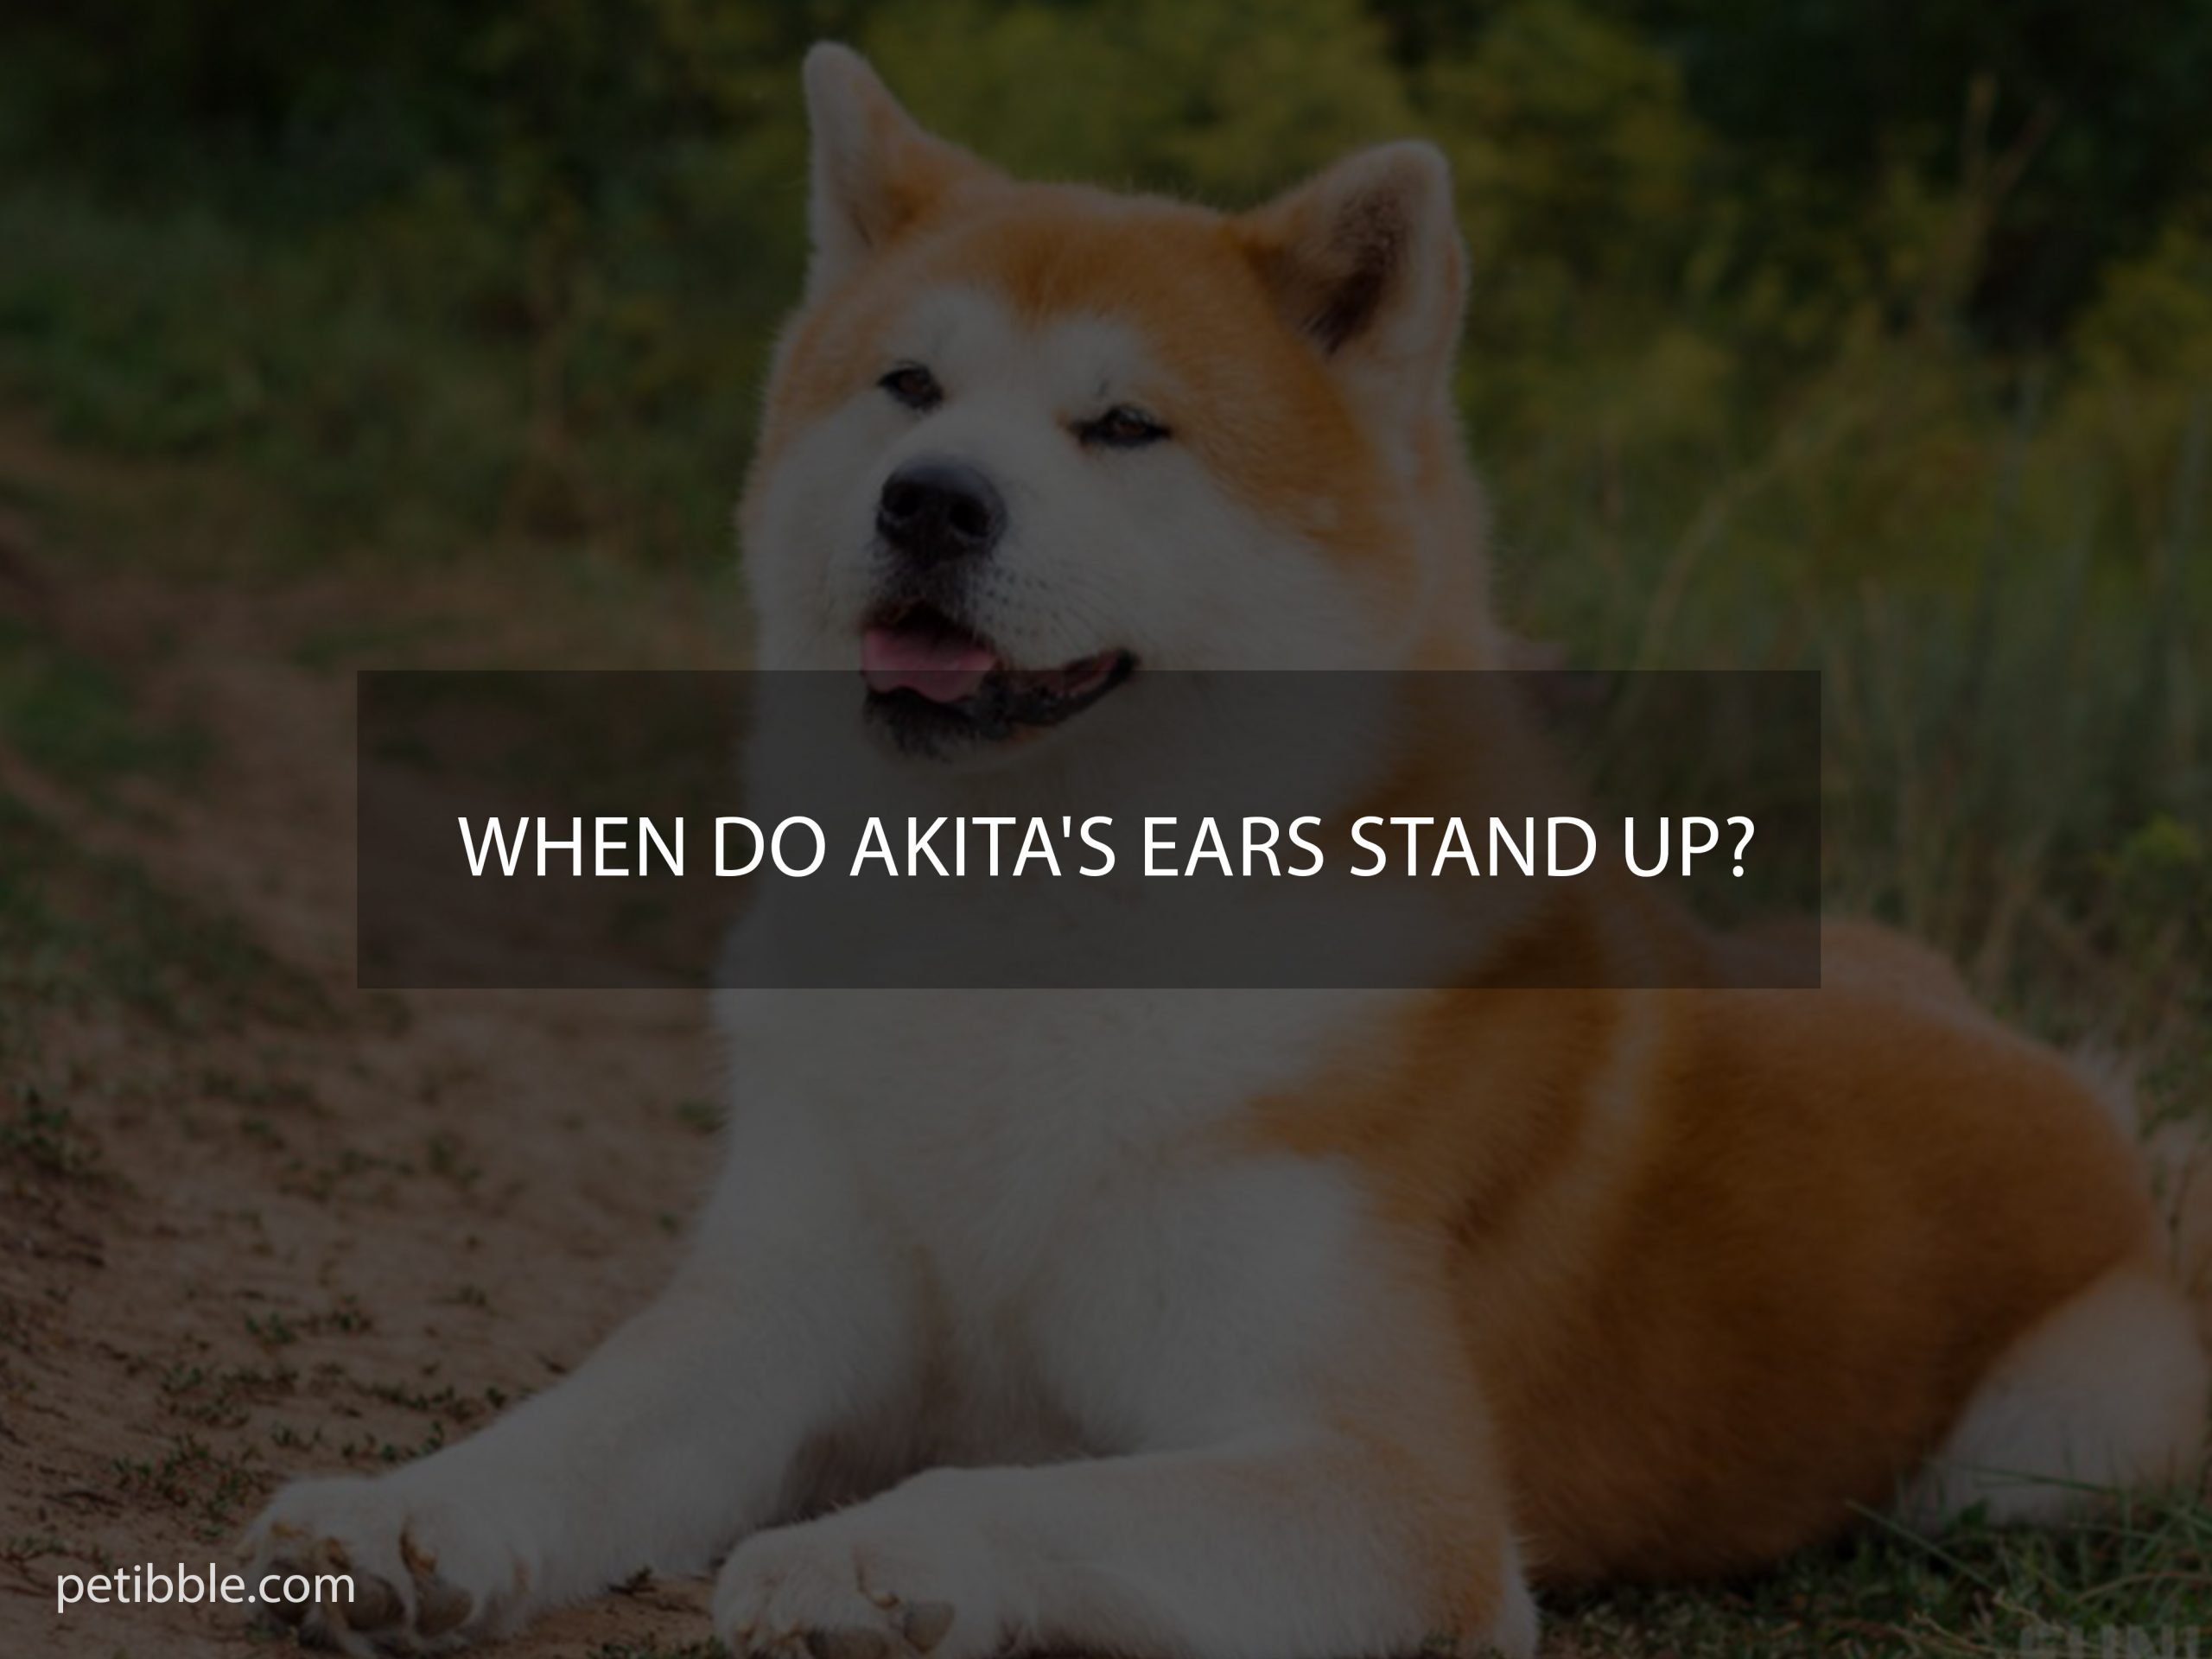 When do Akita's ears Stand up?